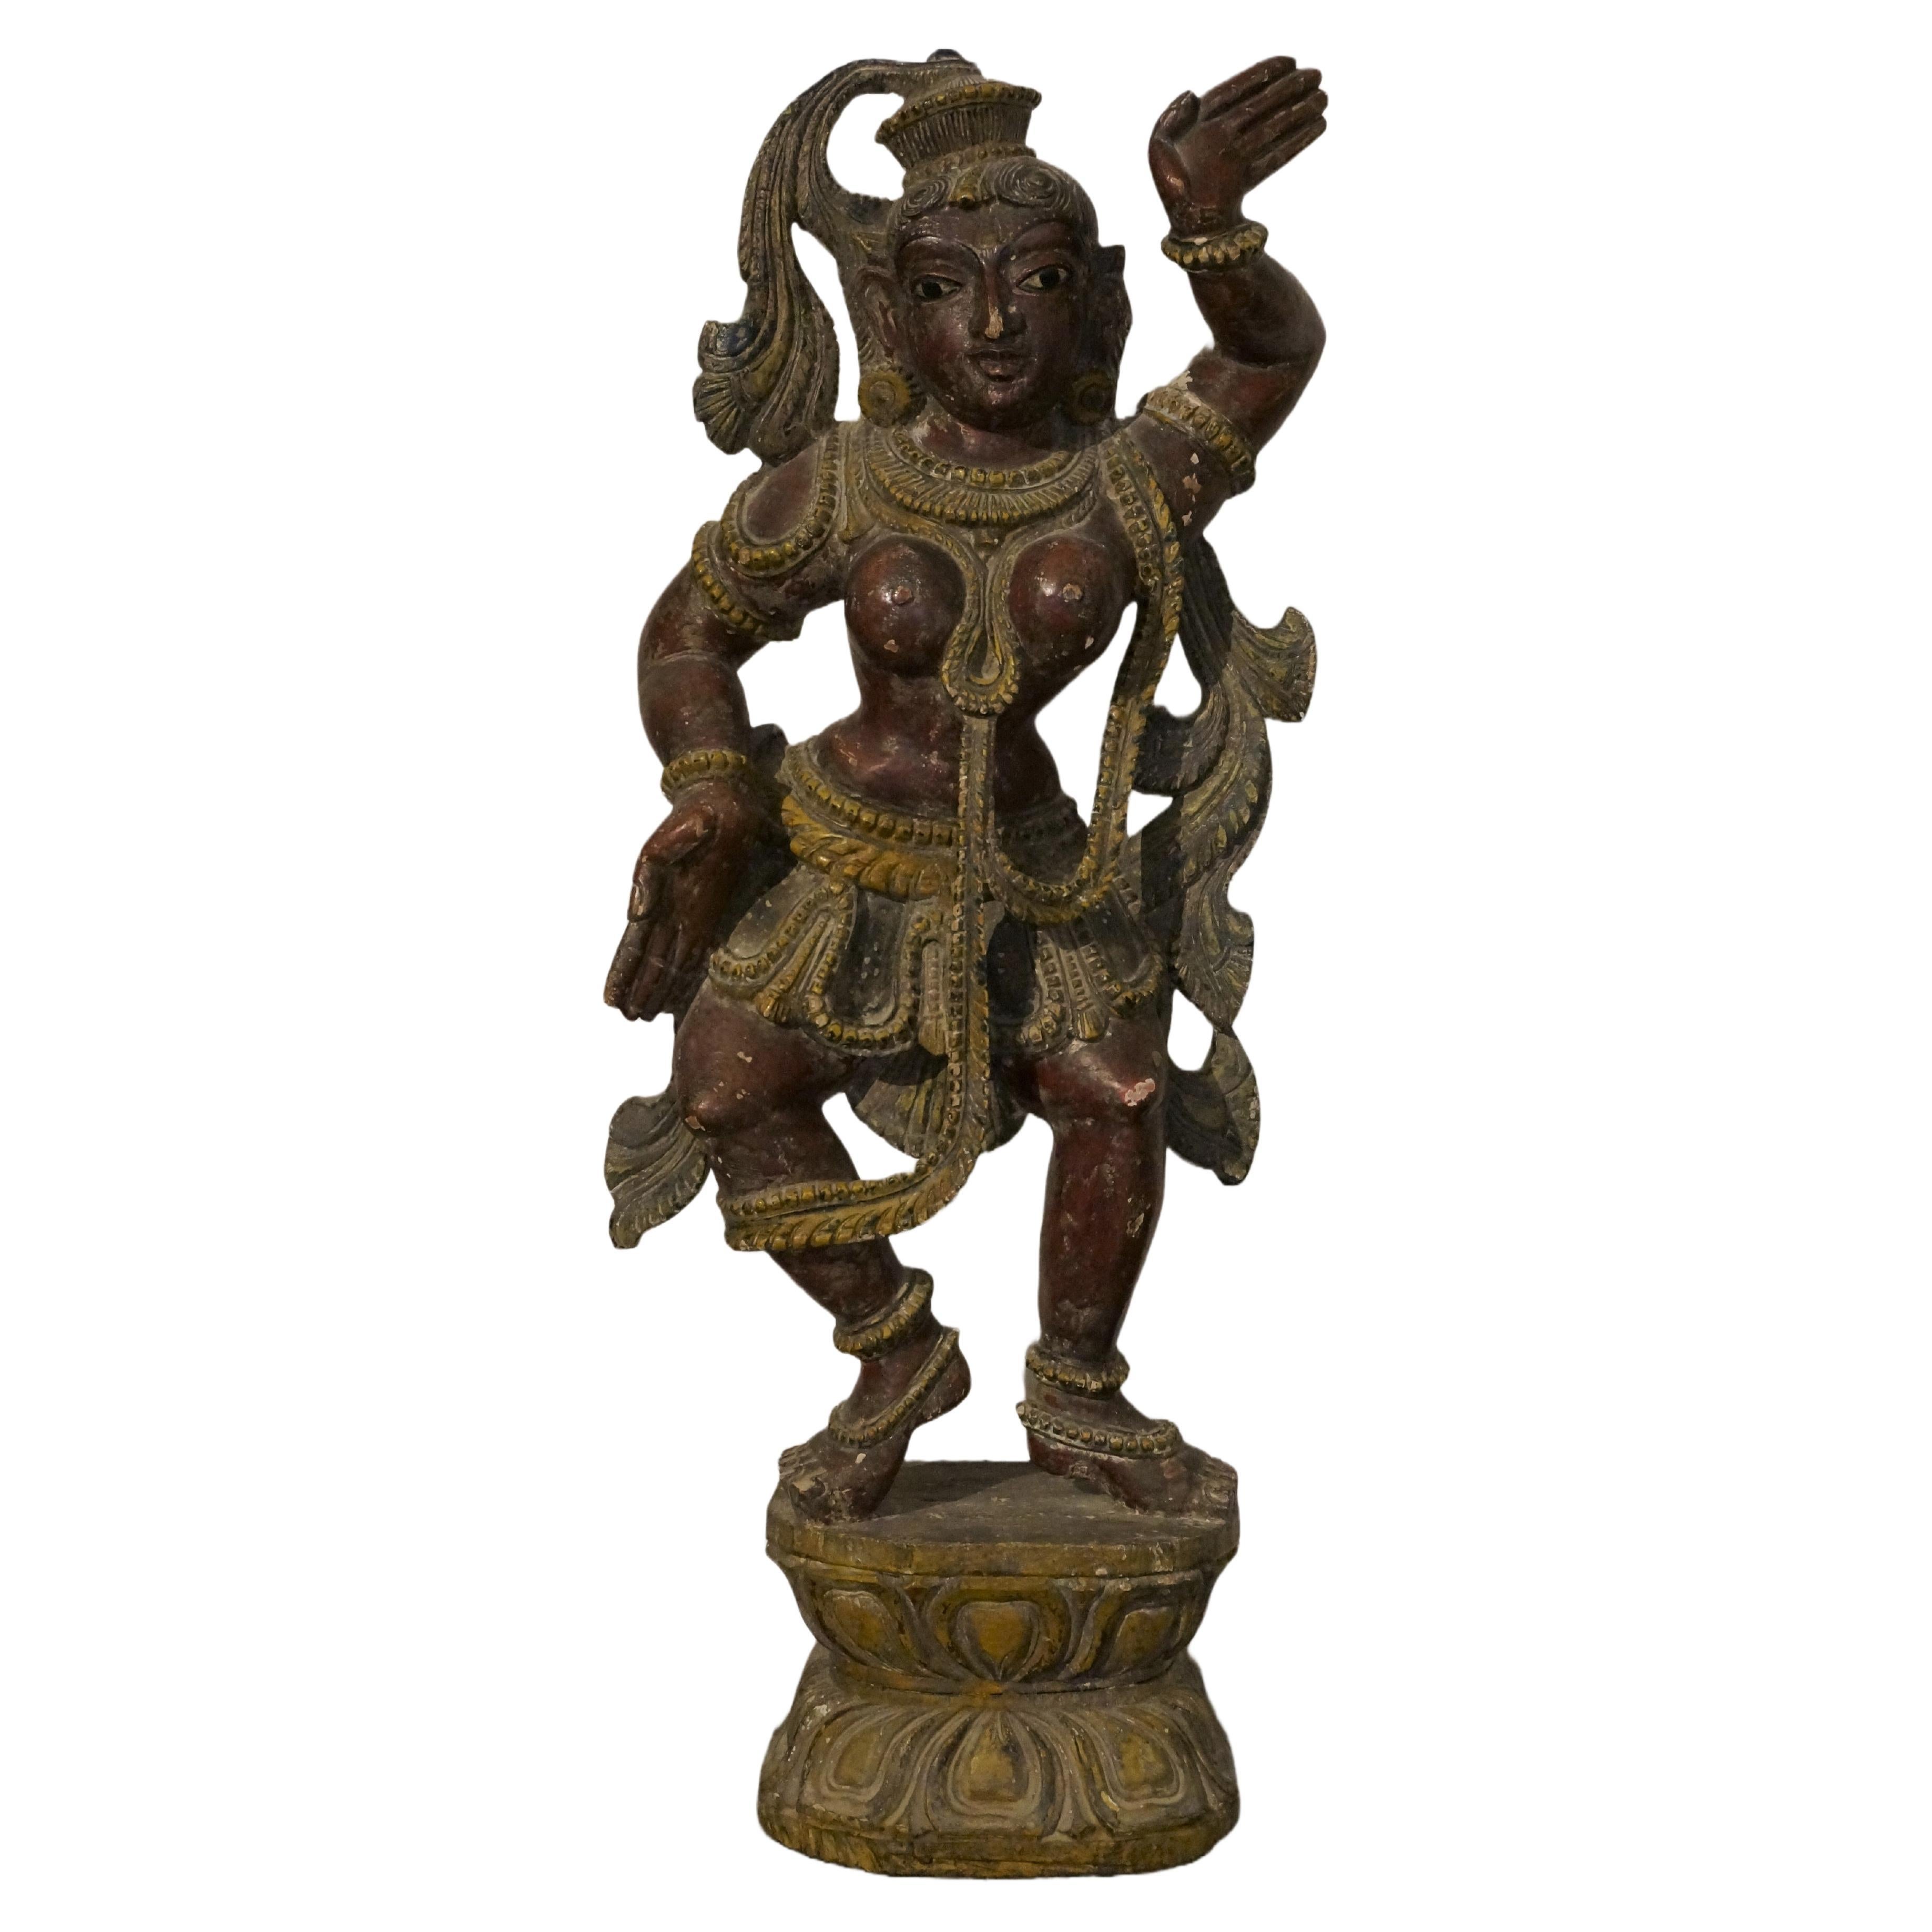 Polychrome wooden Hindu sculpture of a celestial dancer, India, 19th century.